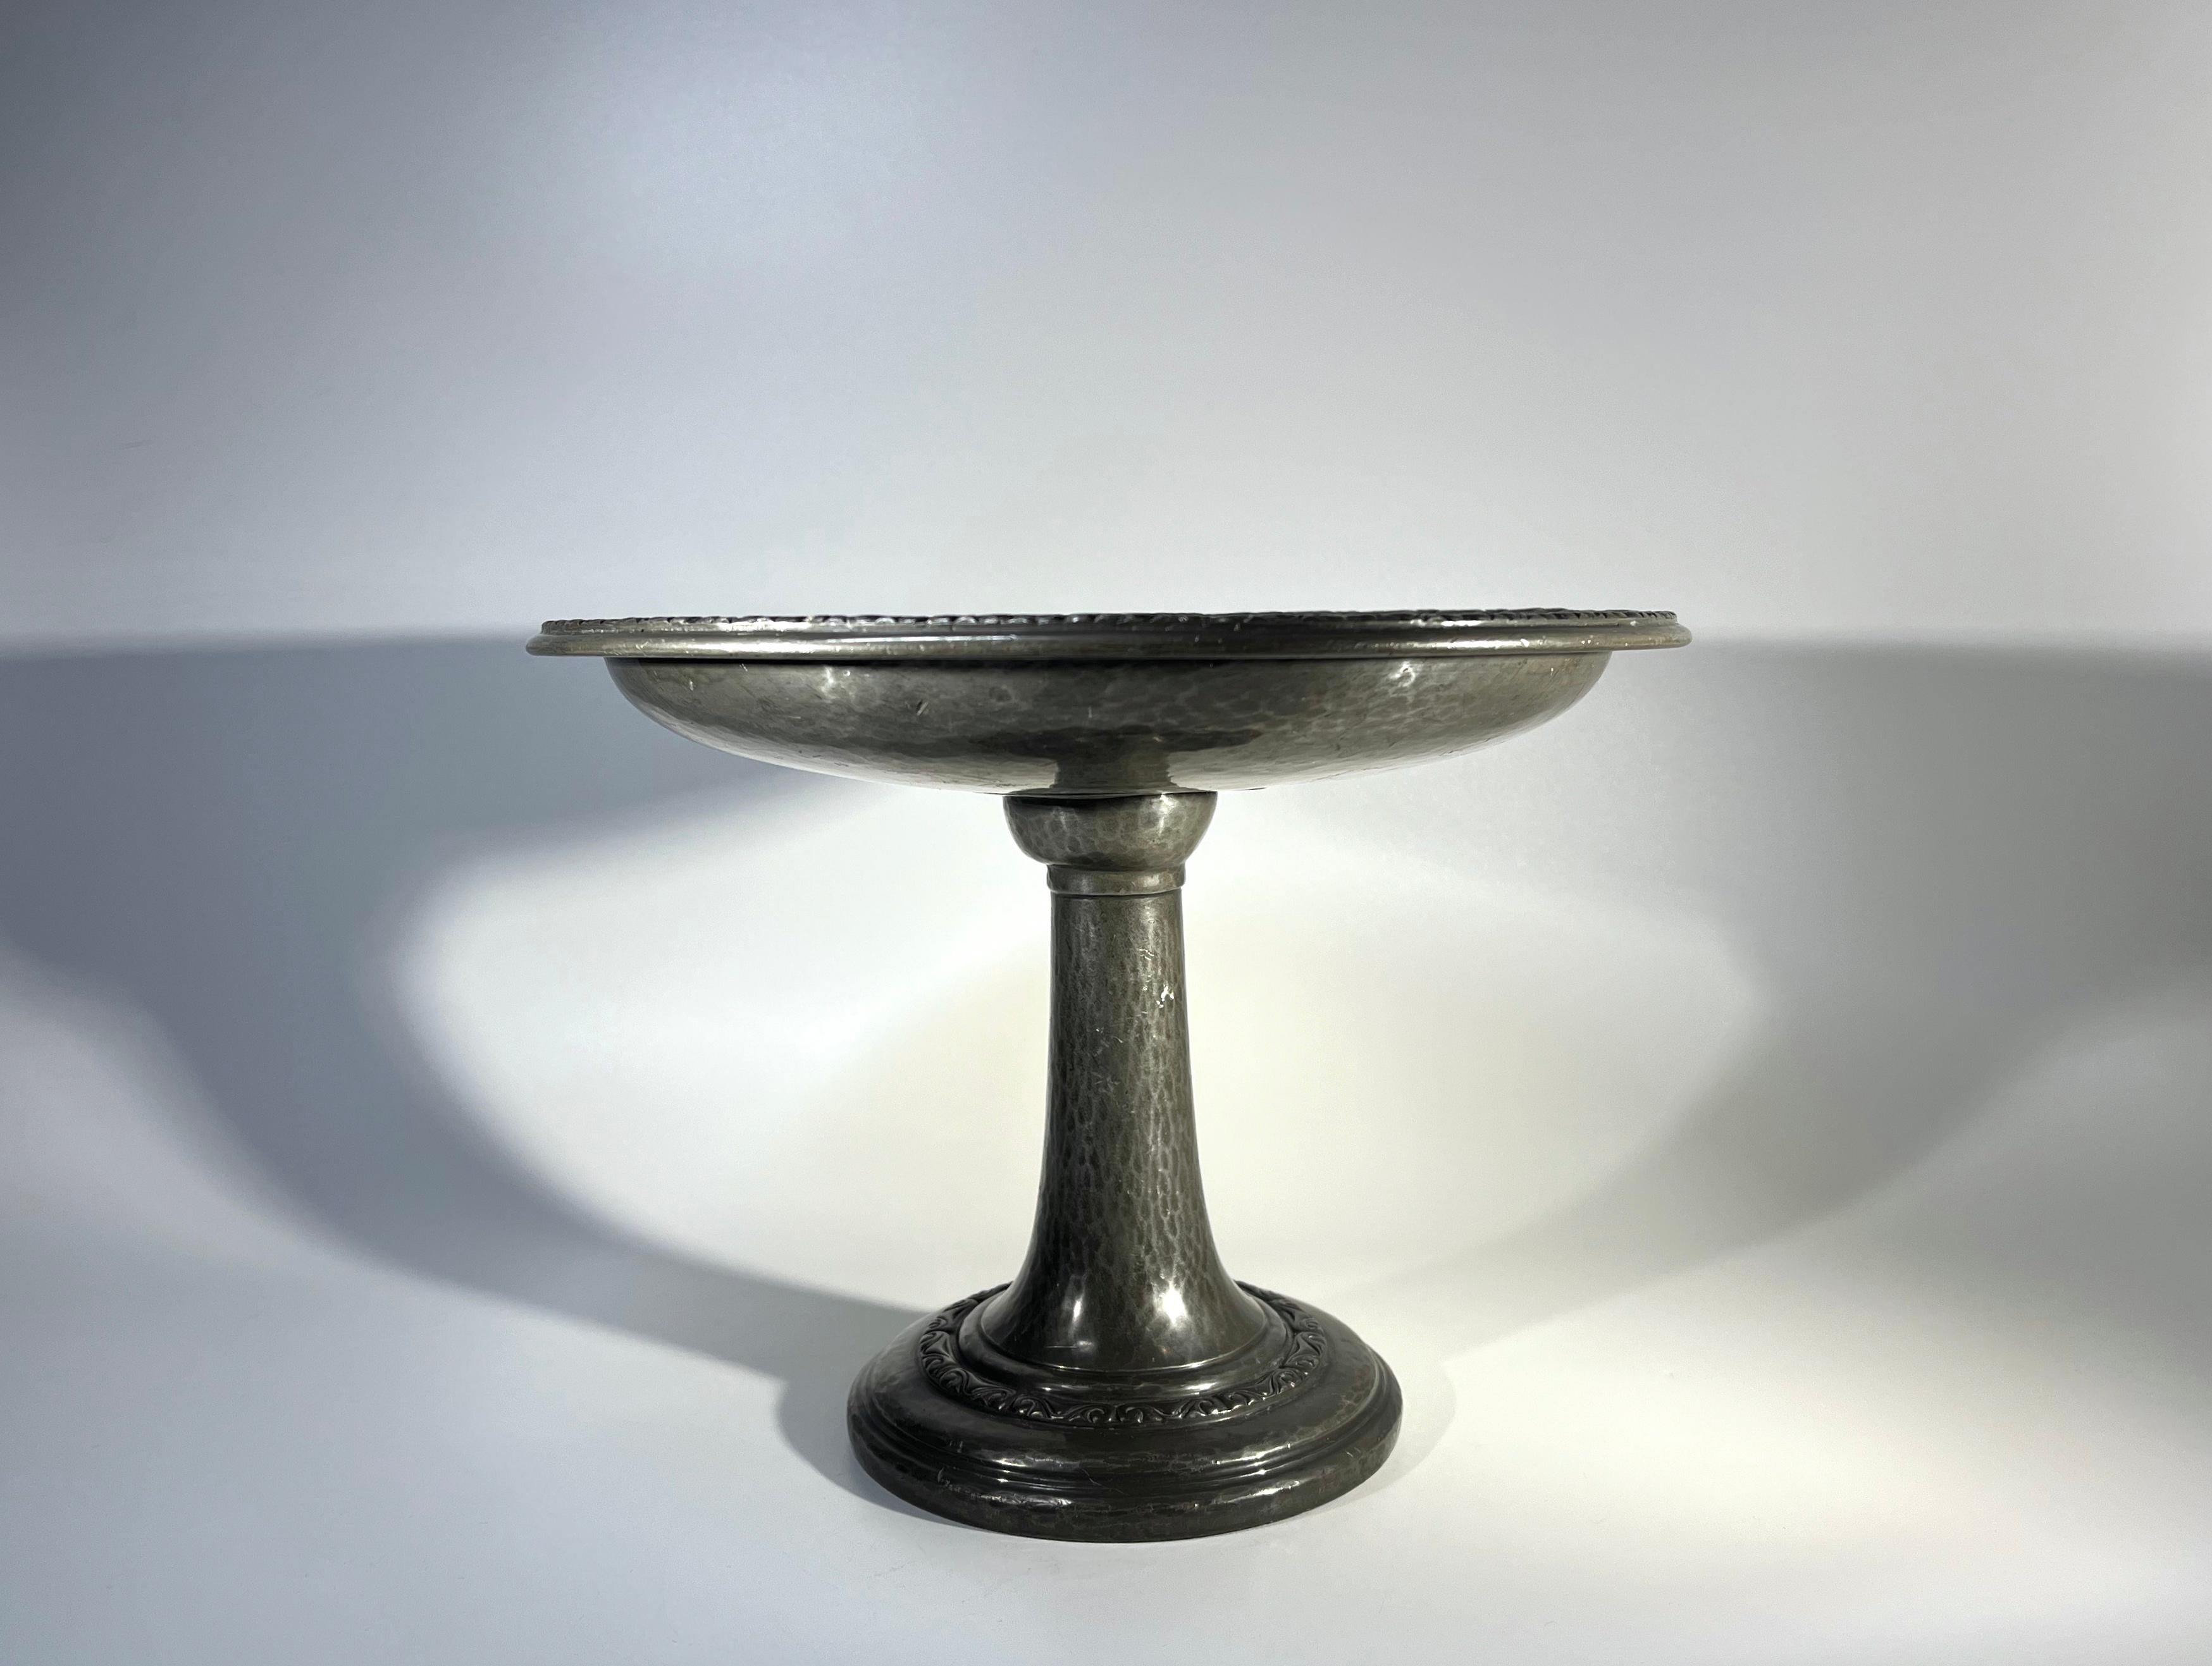 Splendid Art Nouveau antique pewter tazza for Liberty & Co., Regent Street, London
Tall, impressive table centrepiece with hand hammered and stylised decoration
Circa 1910
Signed 'Tudric', English Pewter, Liberty & Co 01388 to base
Height 7 inch,